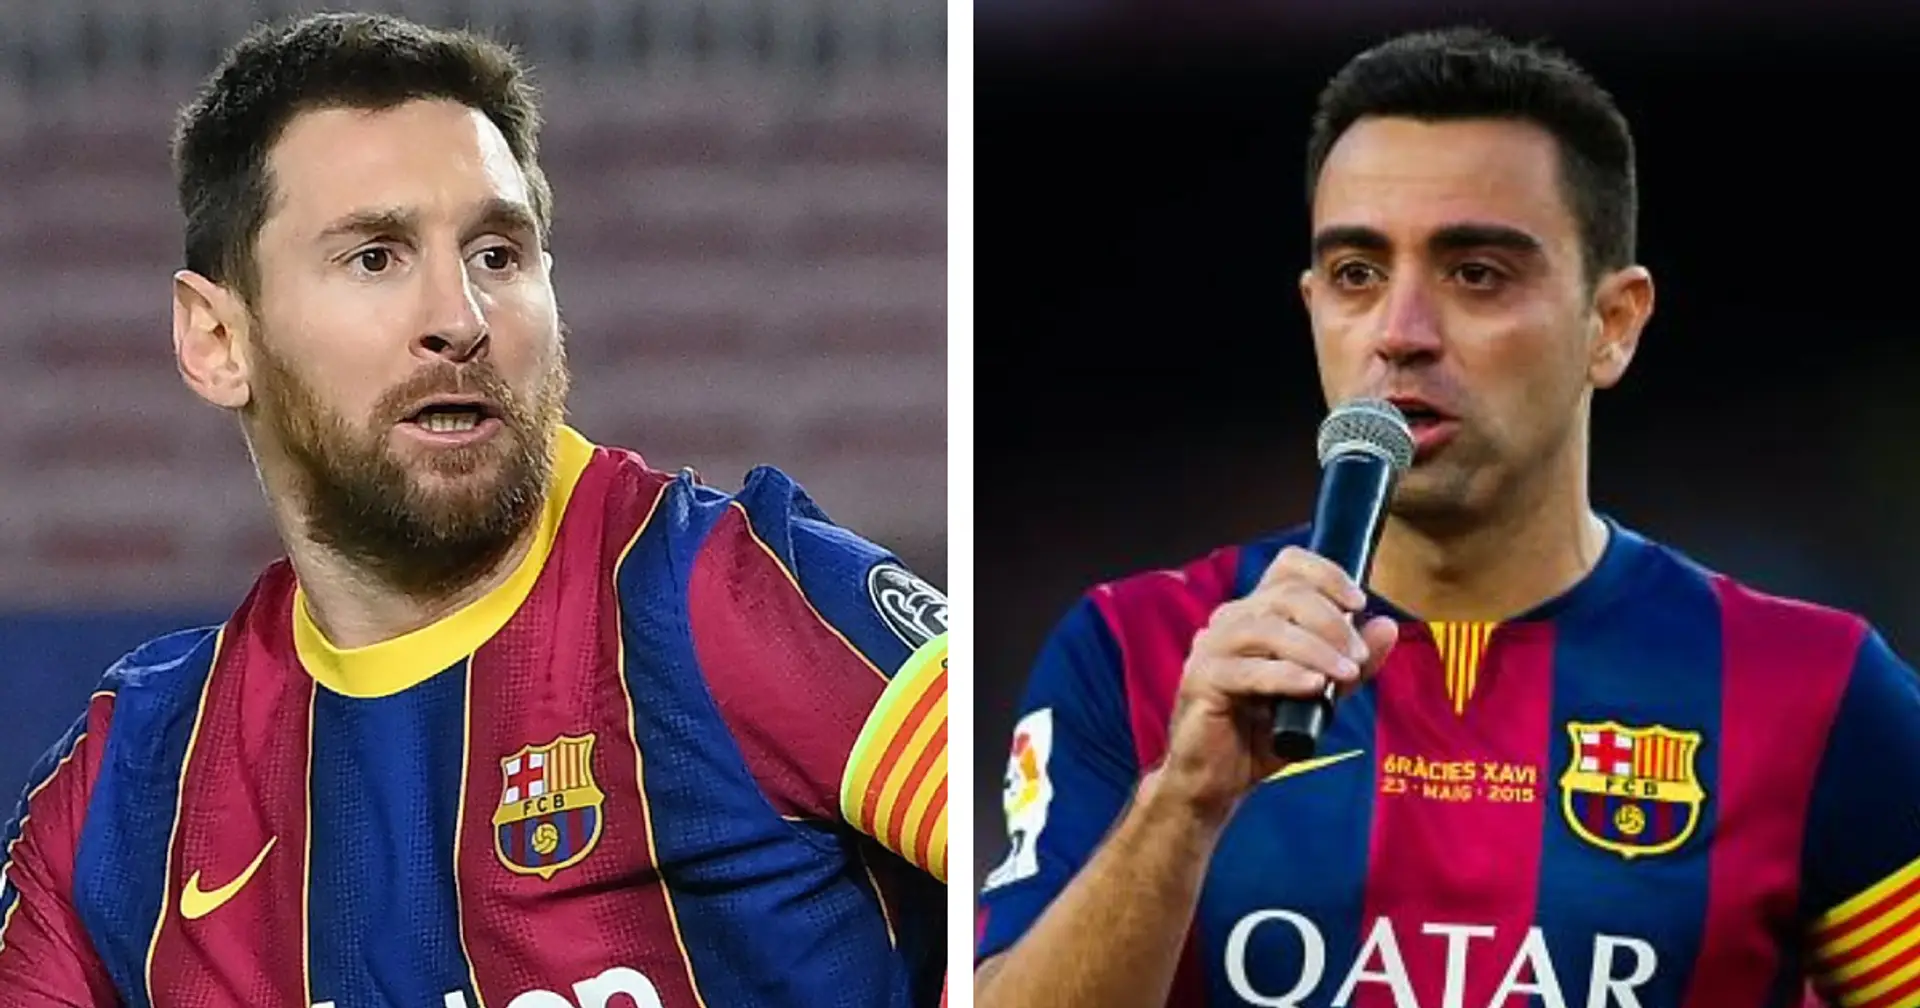 'It had to be him': Xavi on Messi beating his all-time Barca record